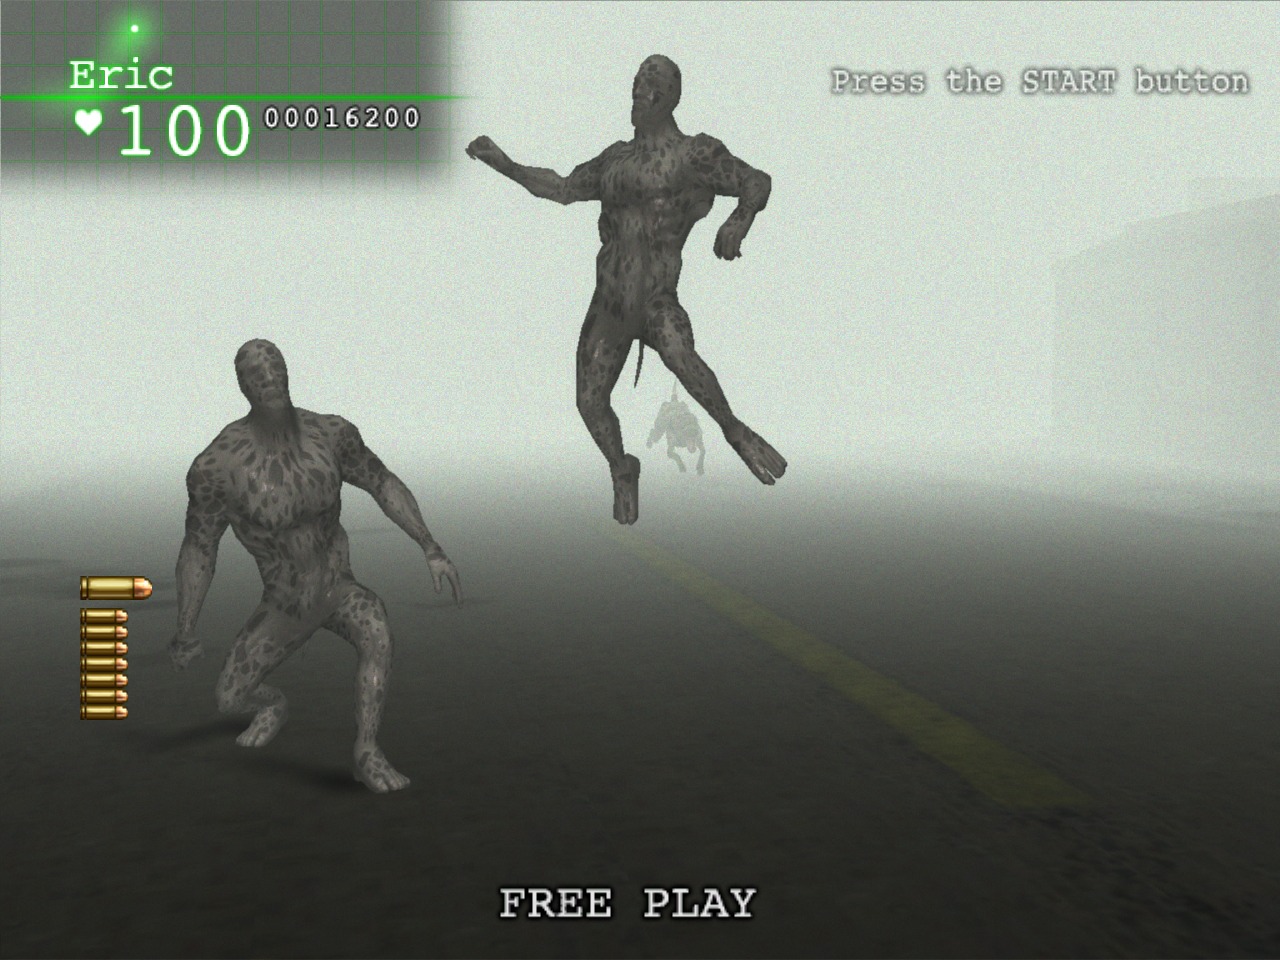 Silent Hill: The Arcade – Hardcore Gaming 101